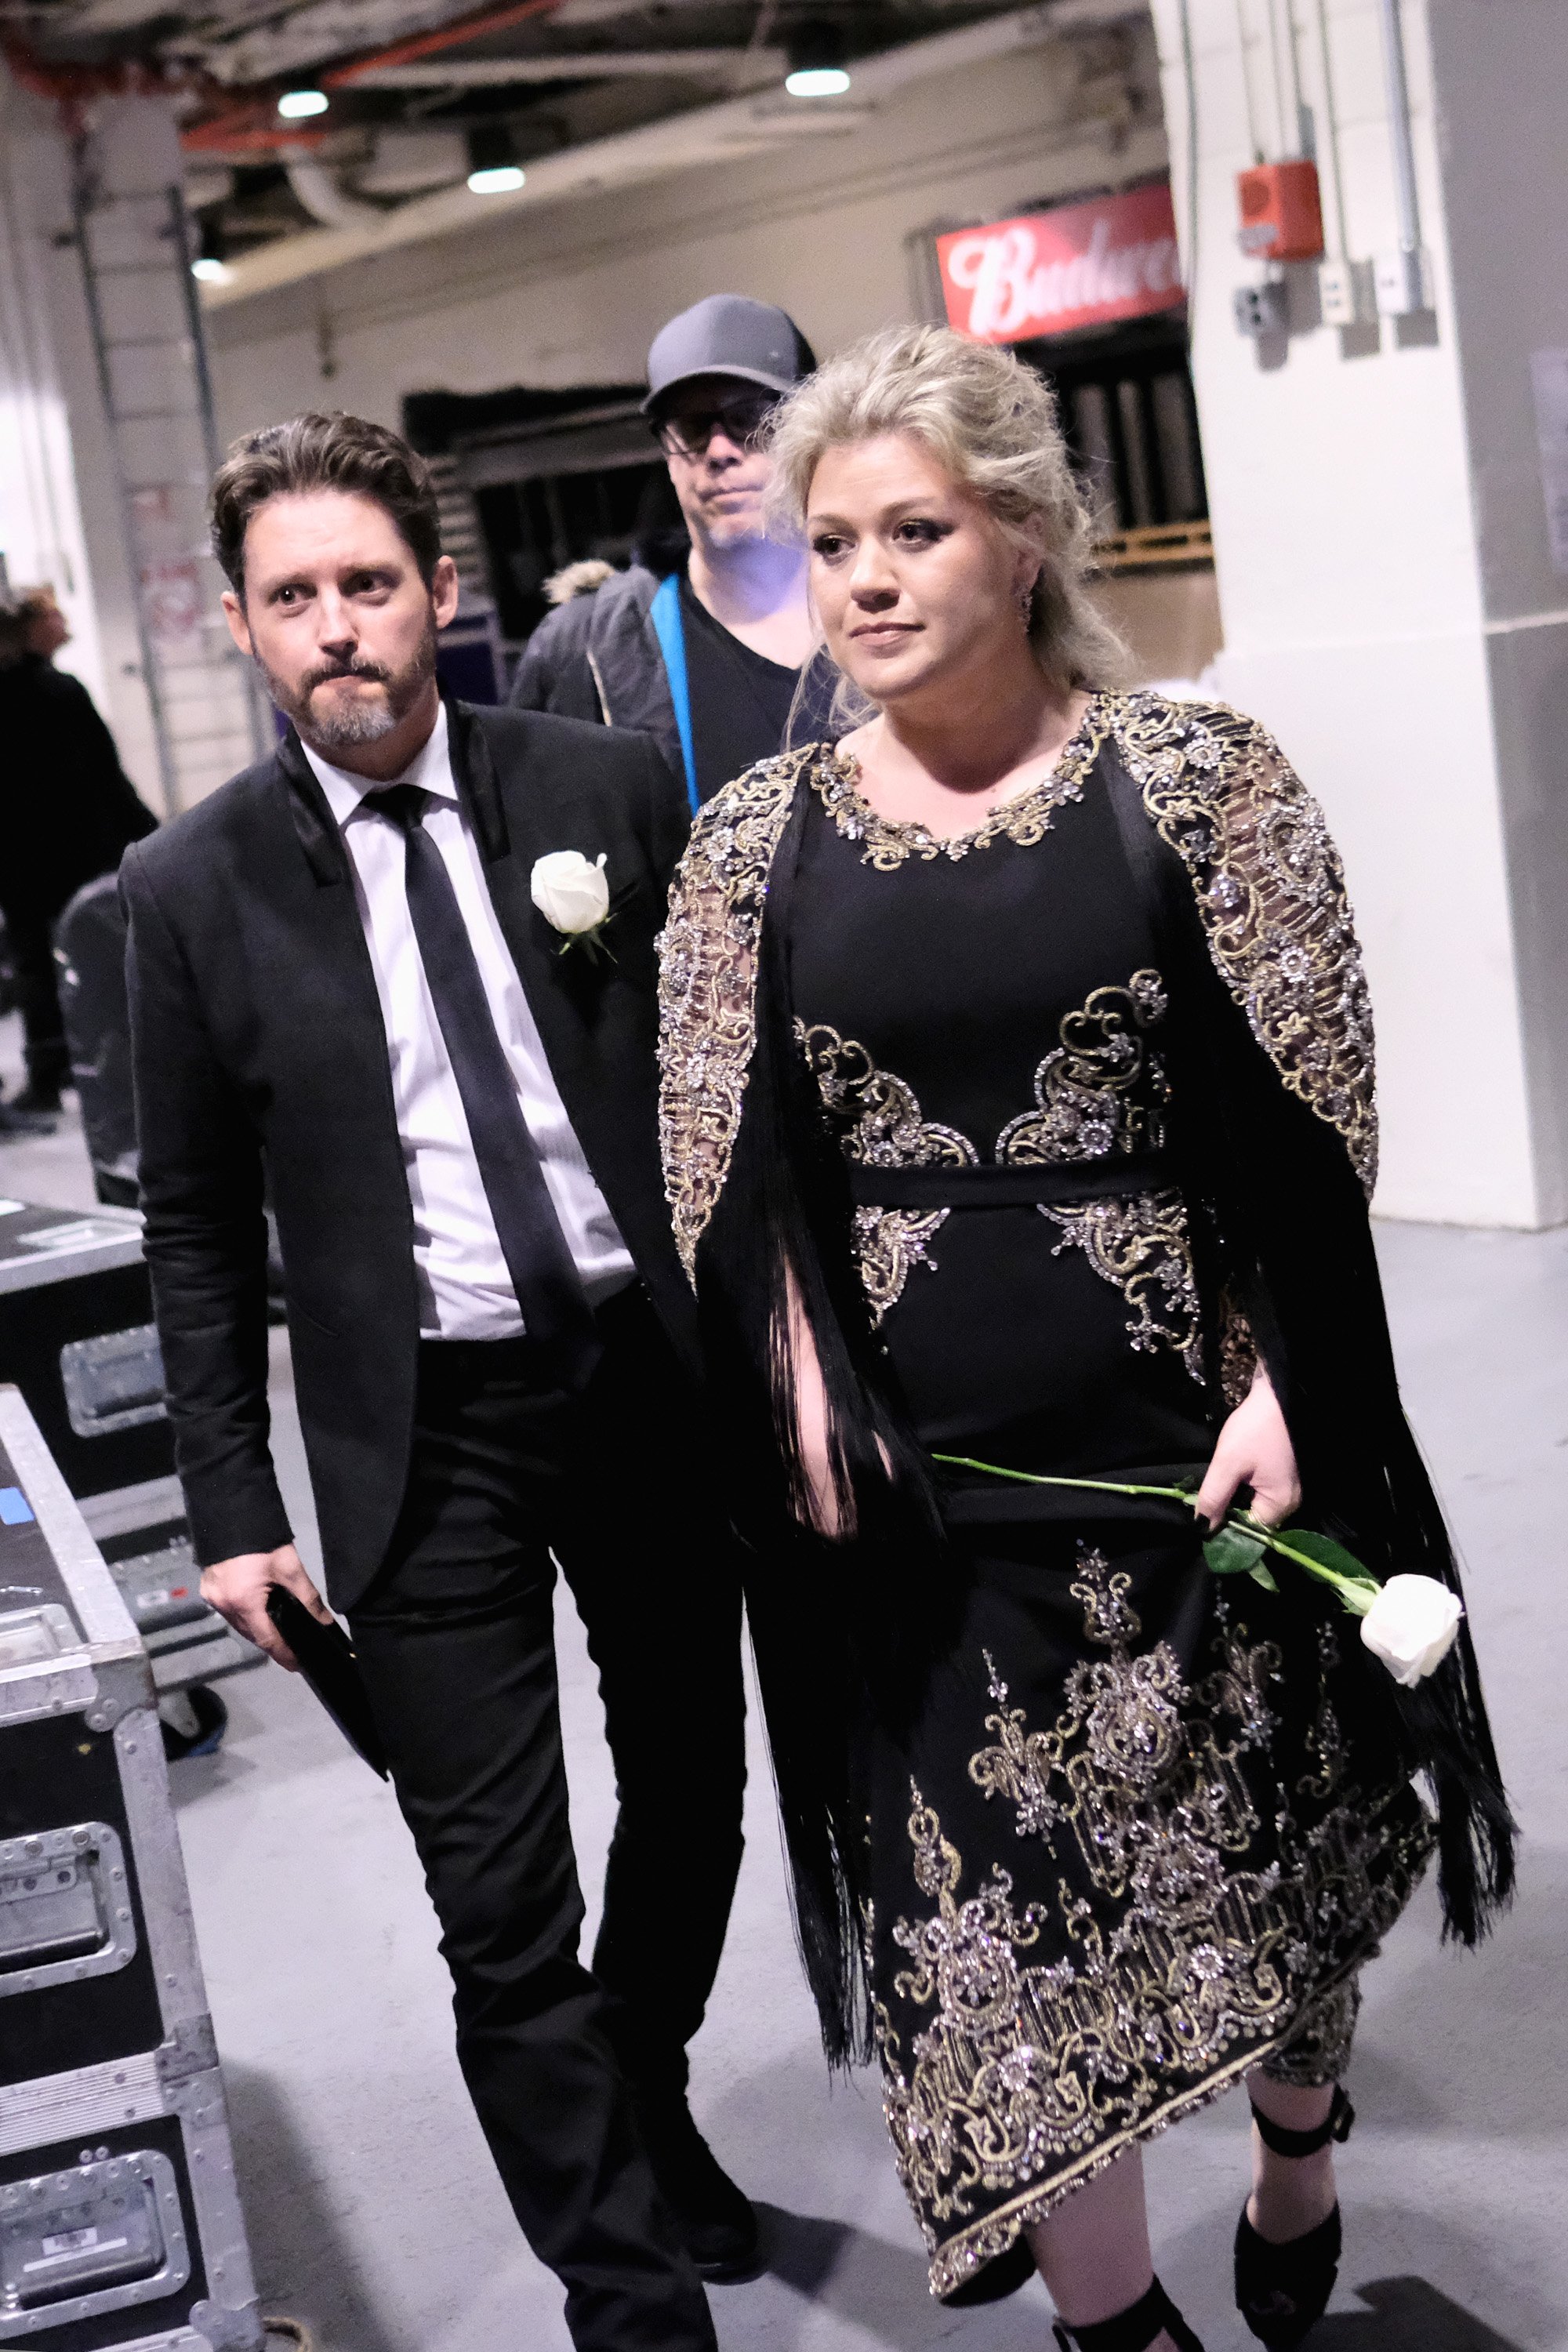 Kelly Clarkson and Brandon Blackstock at the Grammys in California 2018. | Source: Getty Images 